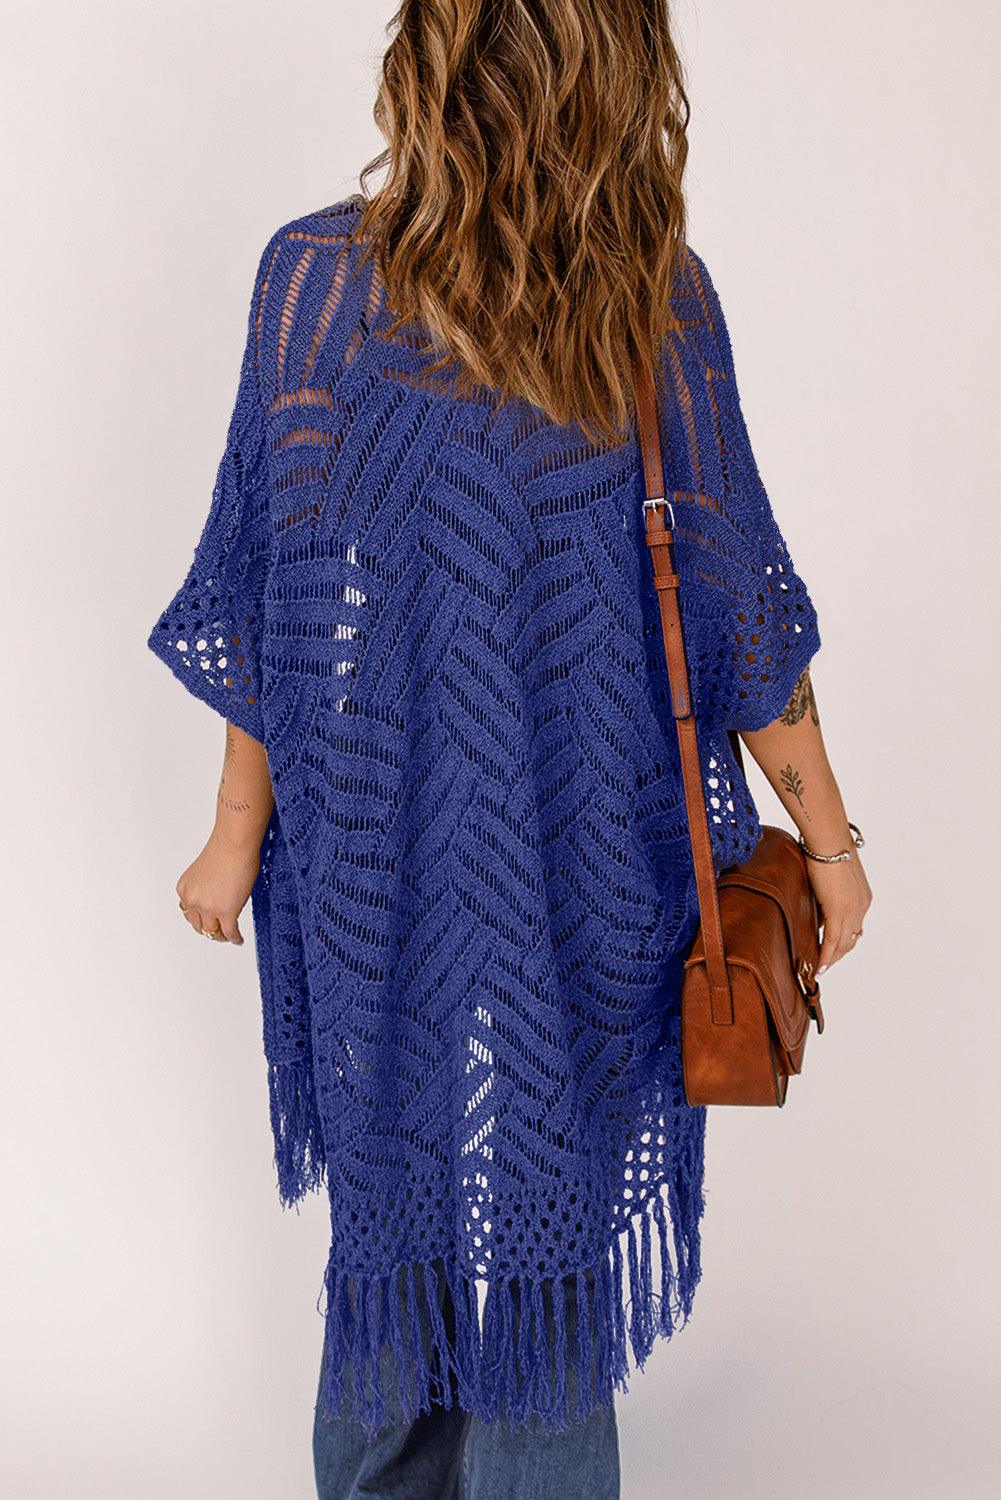 a woman is wearing a blue crochet ponchy